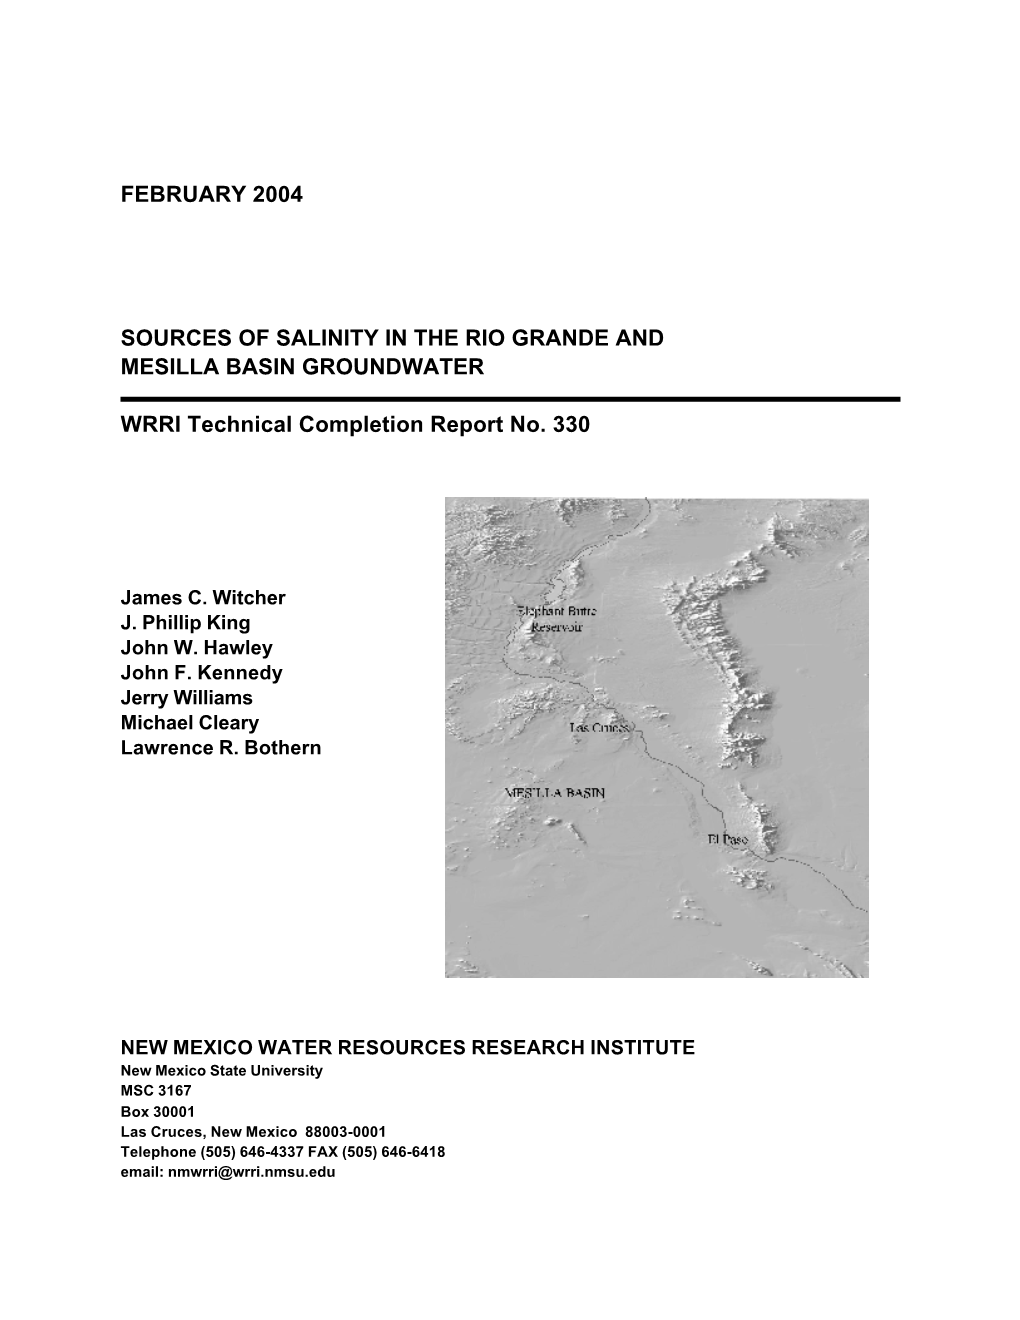 Sources of Salinity in the Rio Grande and Mesilla Basin Groundwater